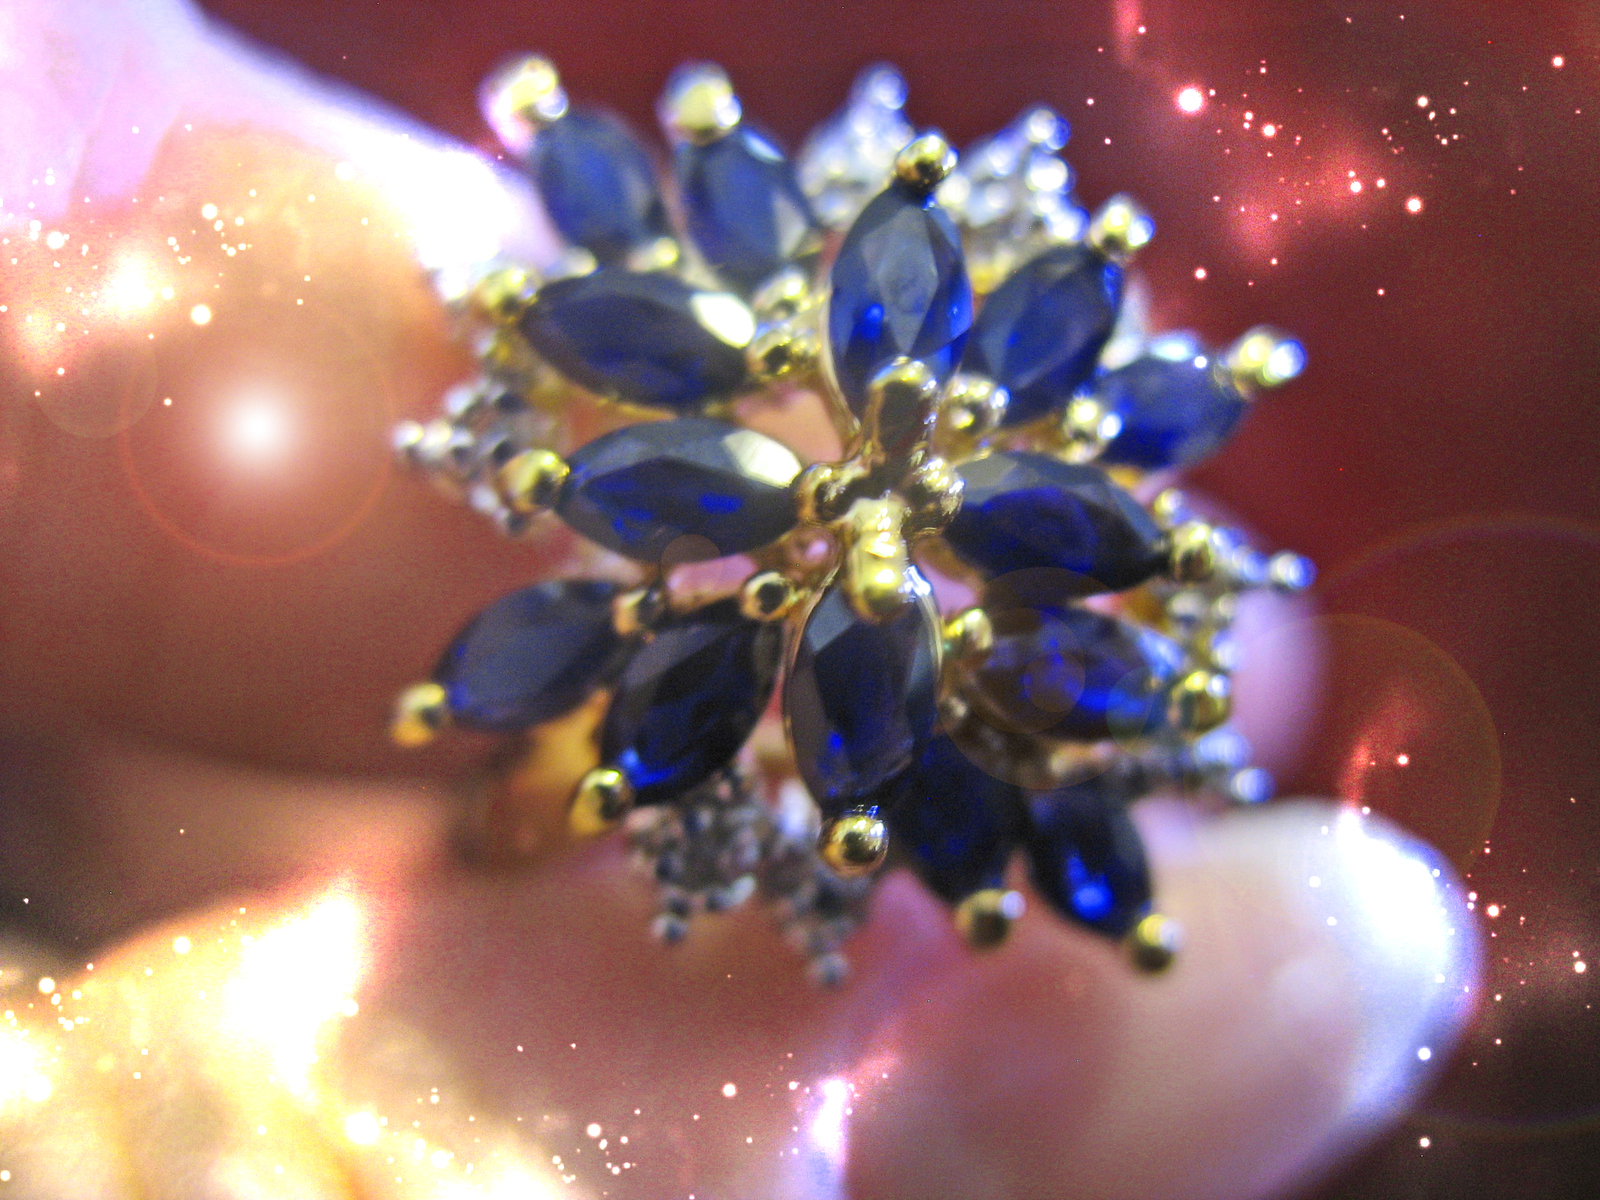 Primary image for HAUNTED ANTIQUE RING ALEXANDRIA'S ROYAL POWER SEEKER MAGICK HIGHEST LIGHT MAGICK